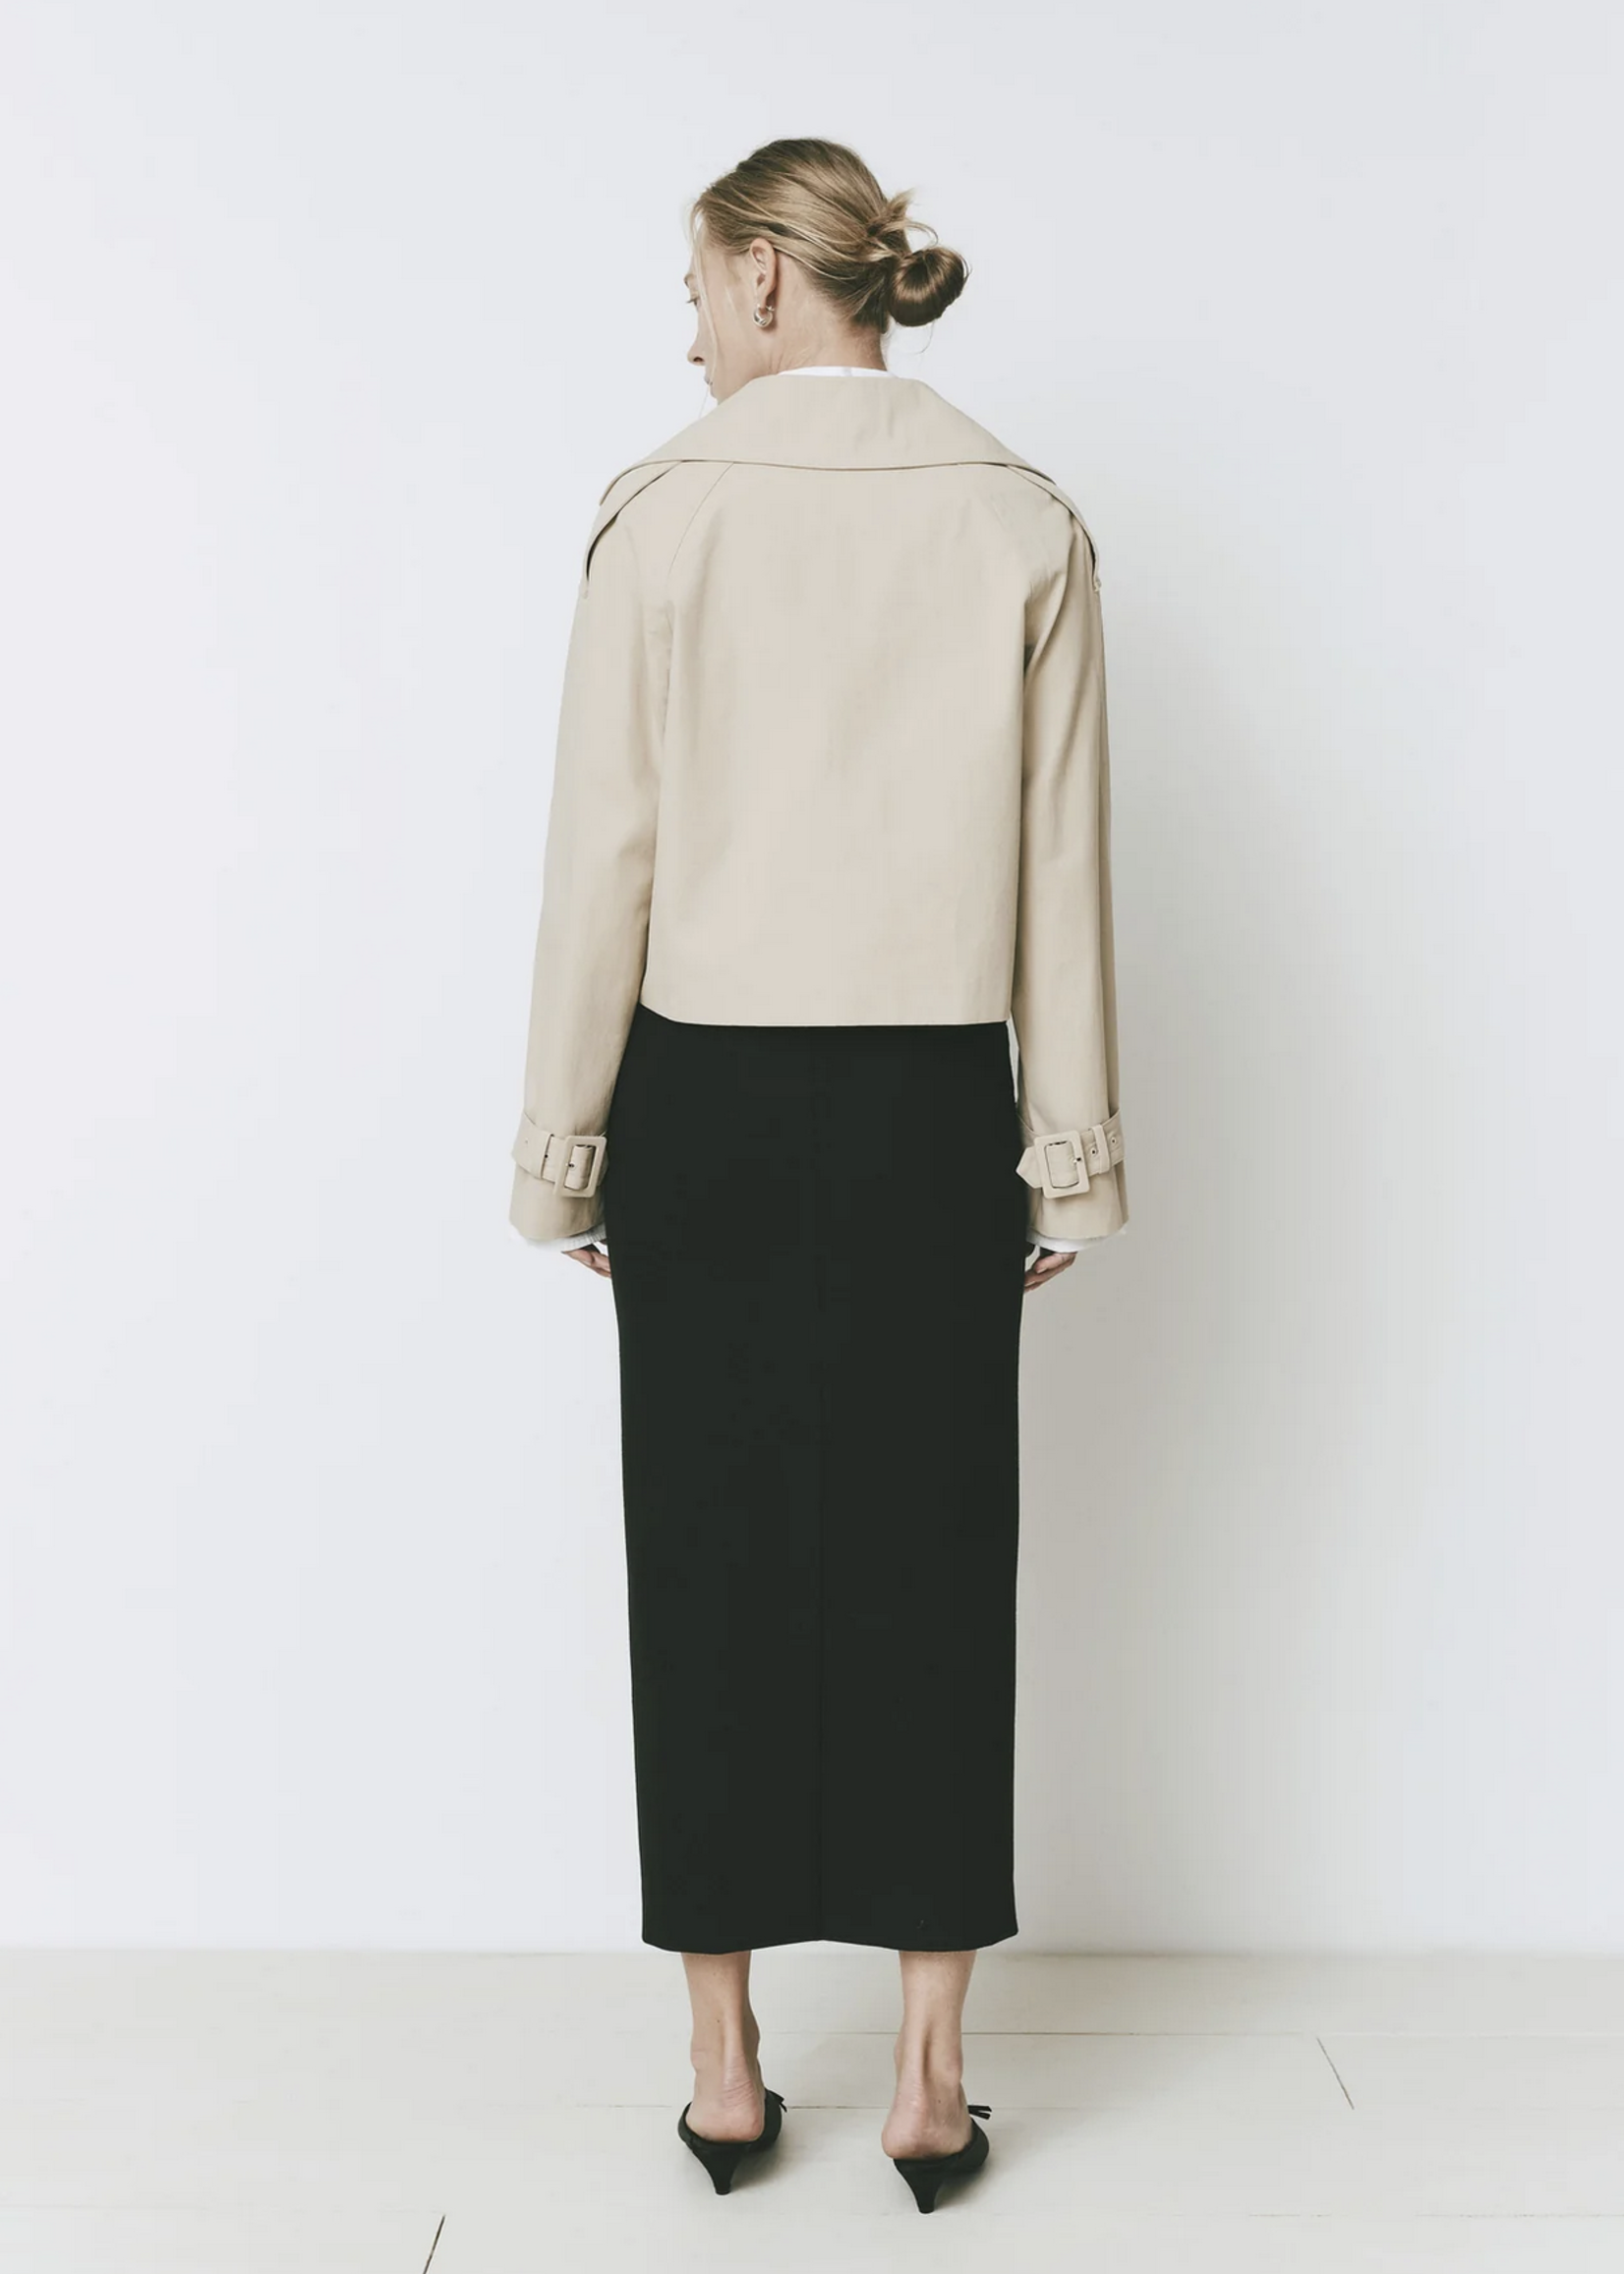 Rue Sophie Honore Cropped Trench Coat